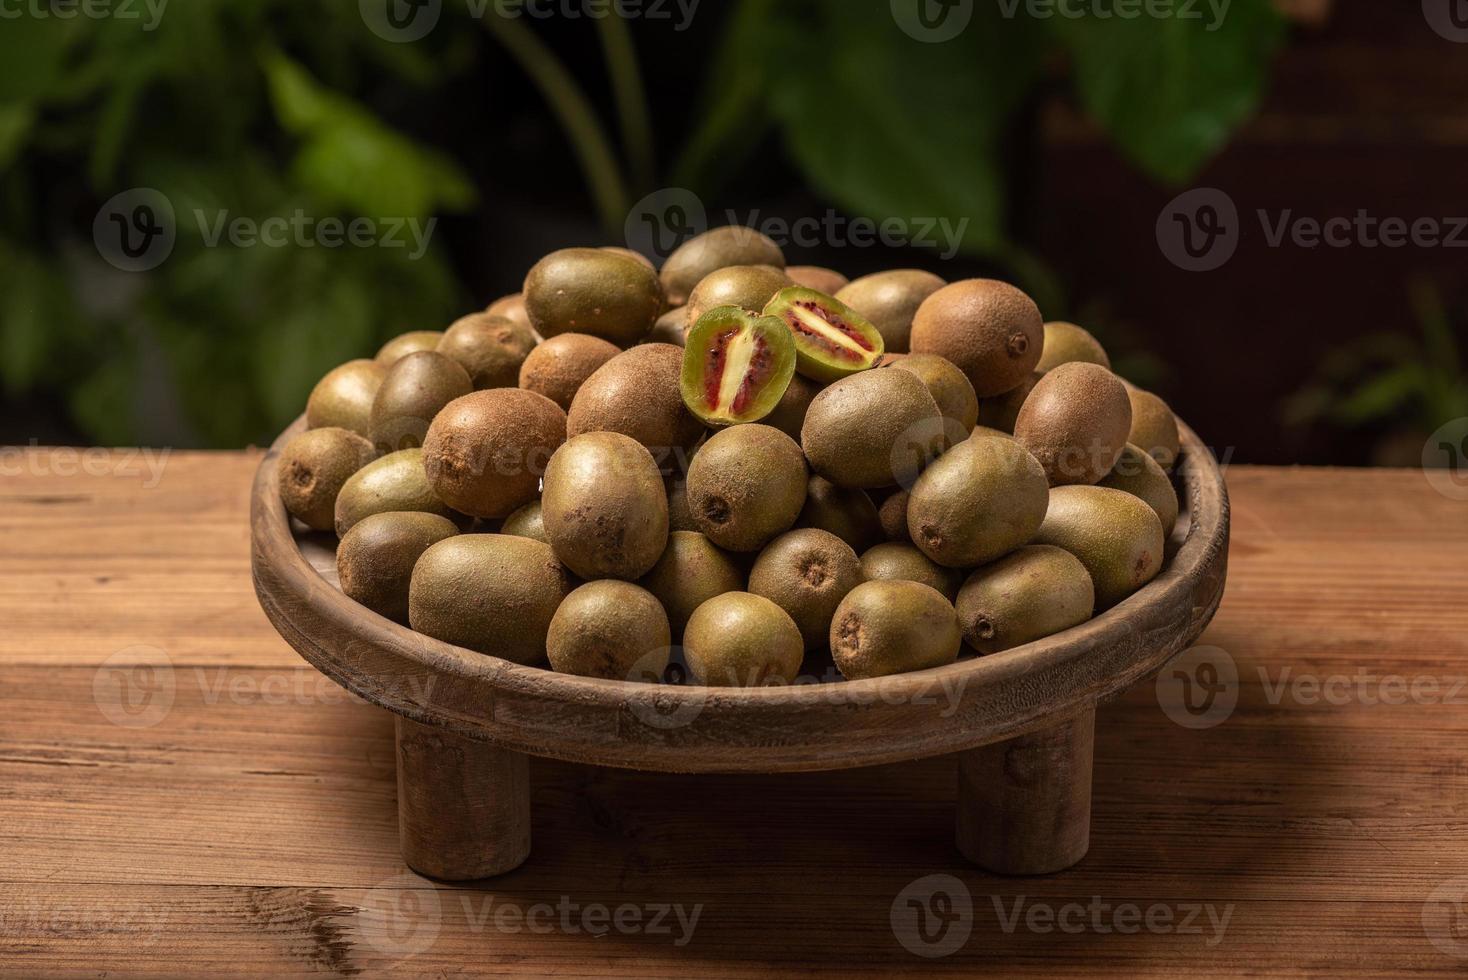 The kiwi fruit on the plate is on the wooden table photo